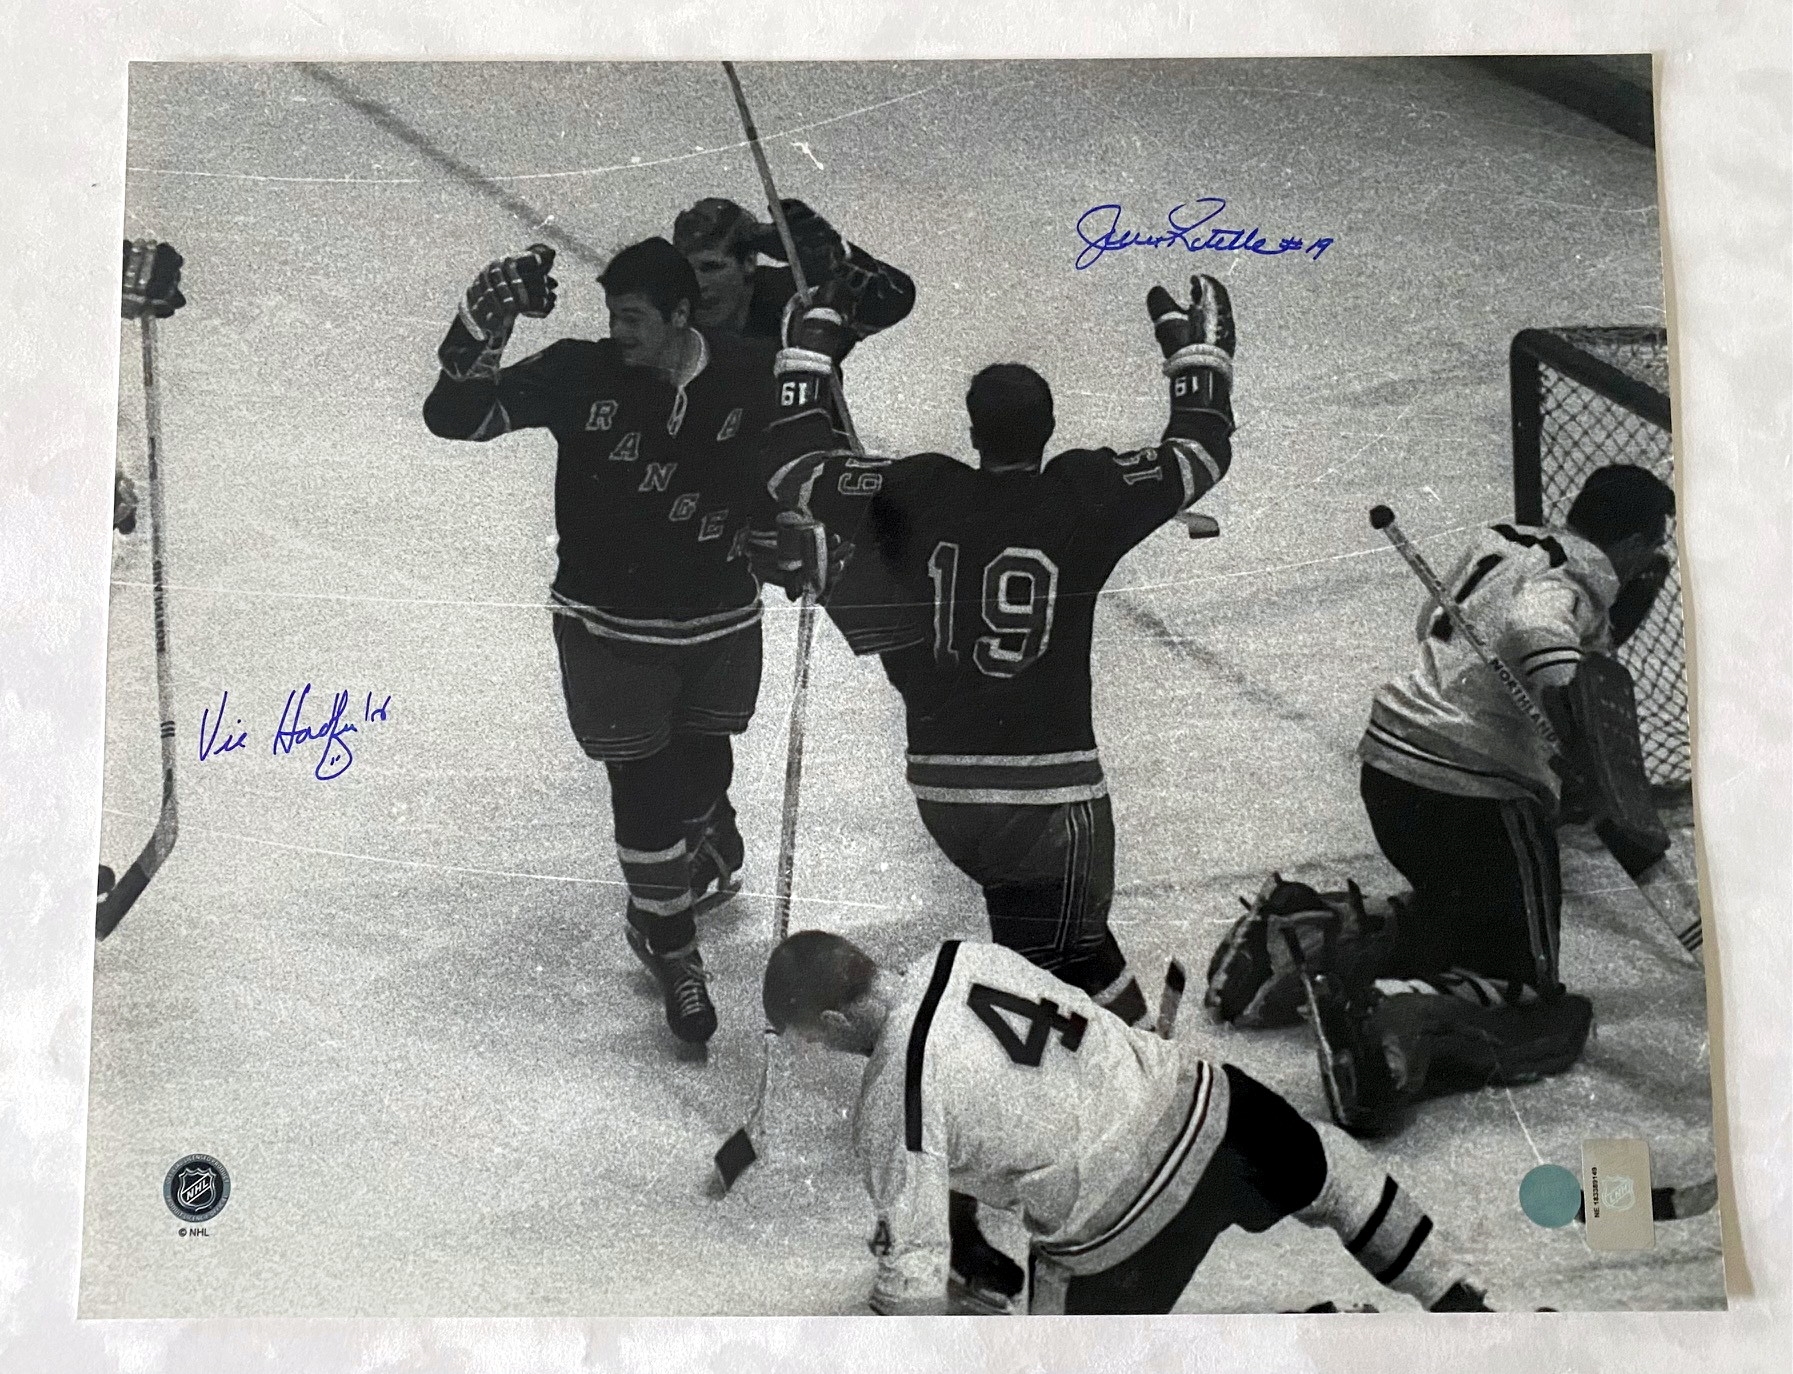 Jean Ratelle & Vic Hadfield New York Rangers Signed GAG Line 16x20 Photo